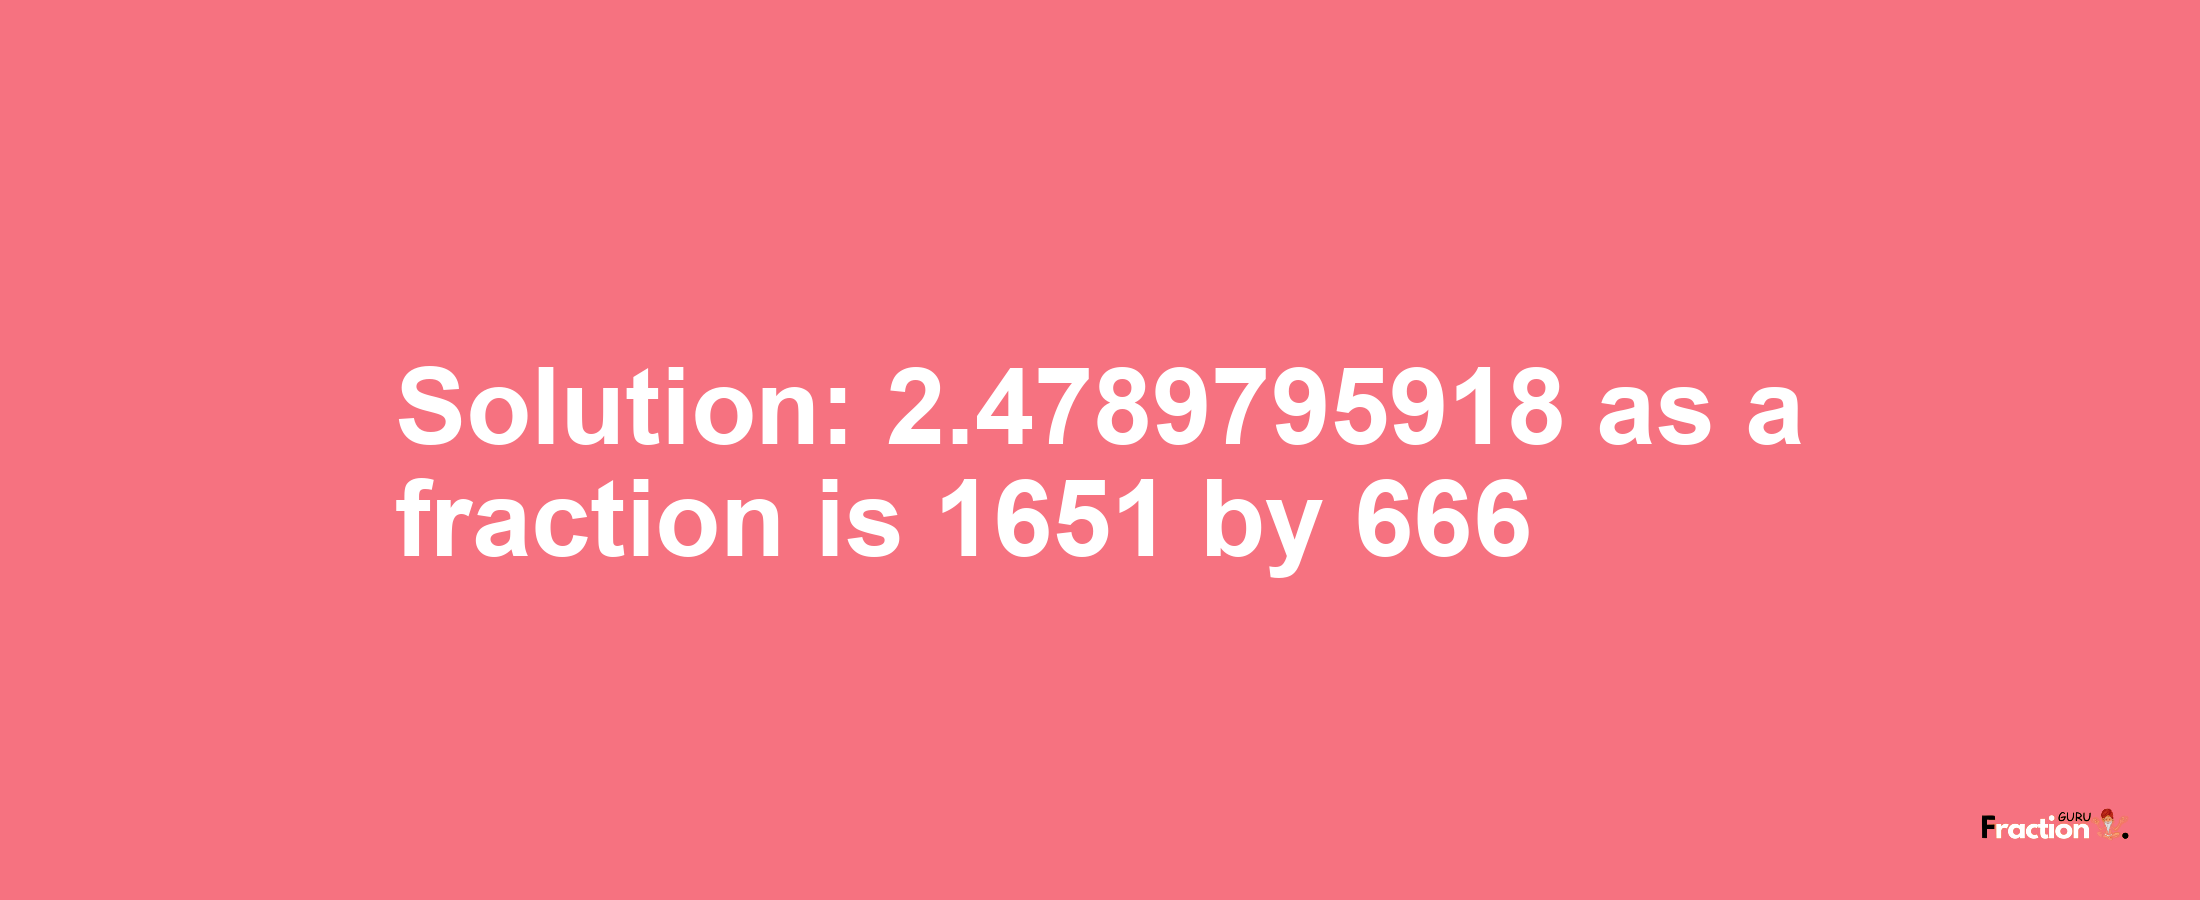 Solution:2.4789795918 as a fraction is 1651/666